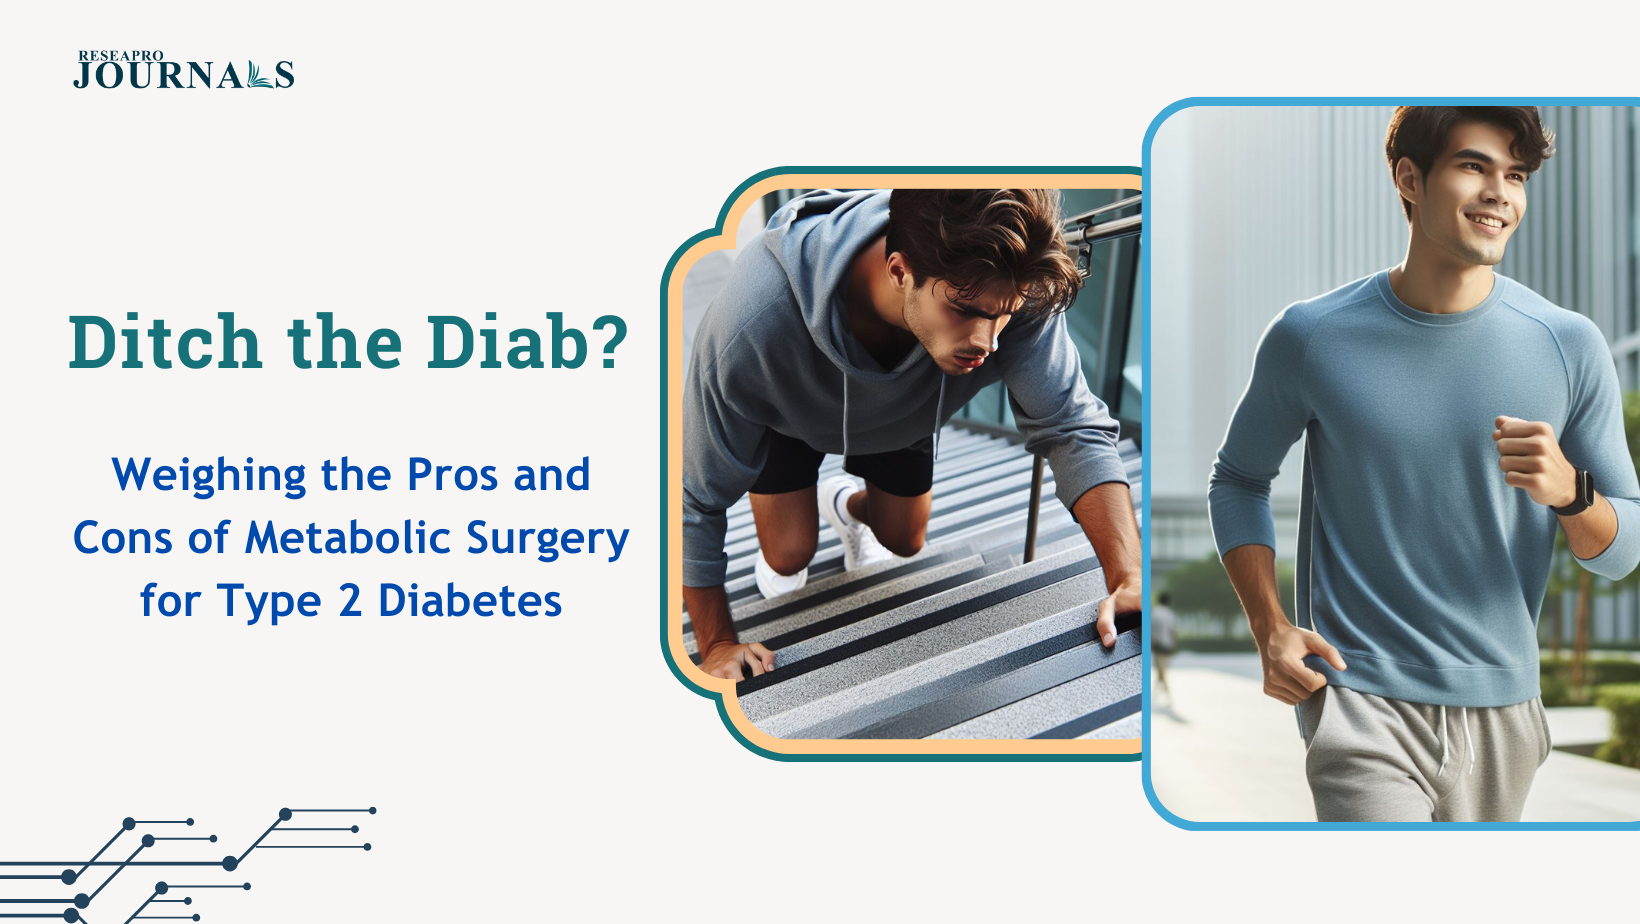 Ditch the Diab? Weighing the Pros and Cons of Metabolic Surgery for Type 2 Diabetes